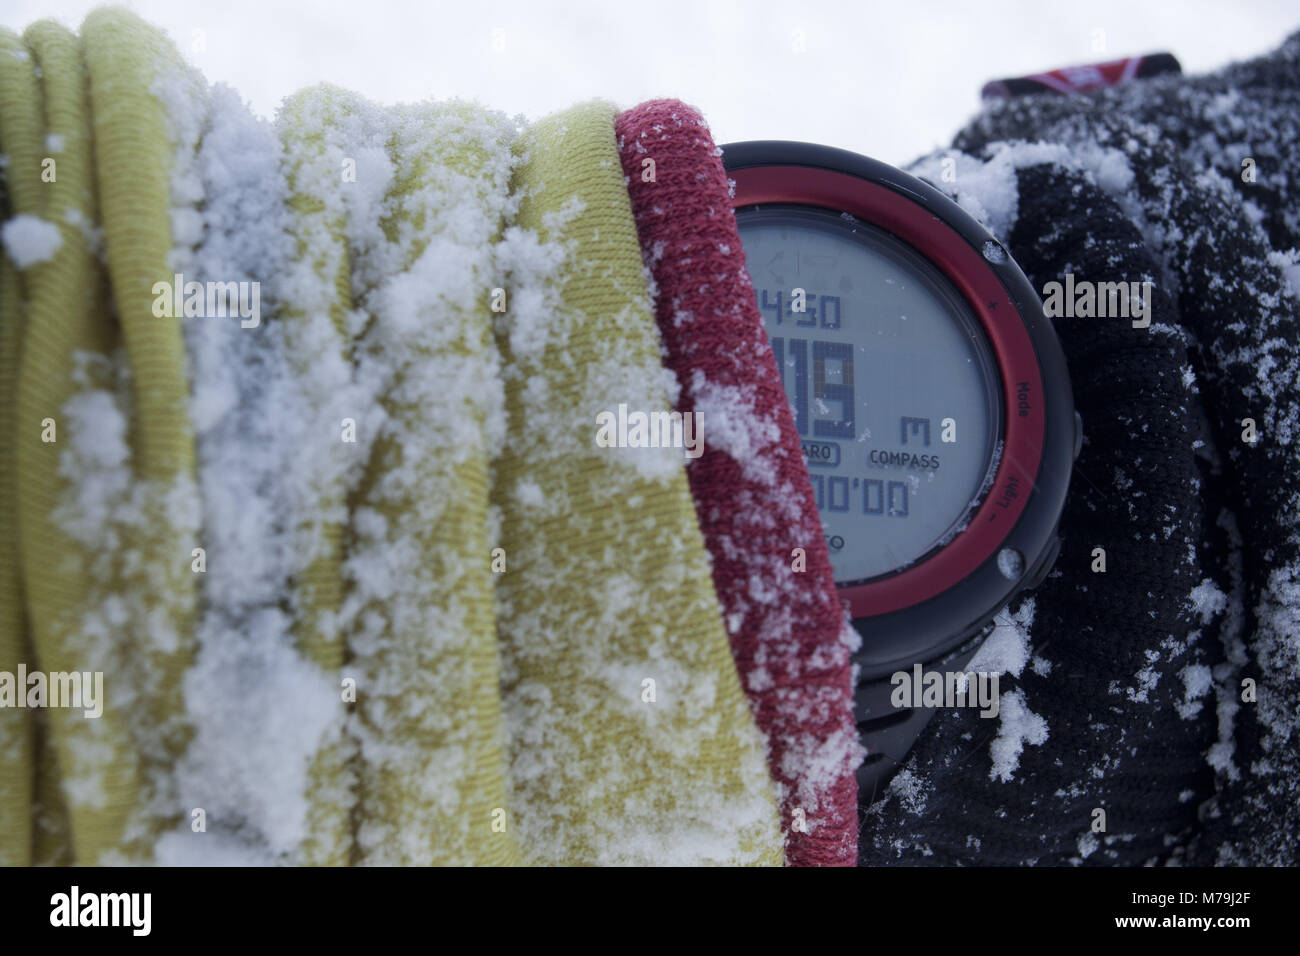 Mountaineer's clock at the wrist, snow, close-up, Stock Photo